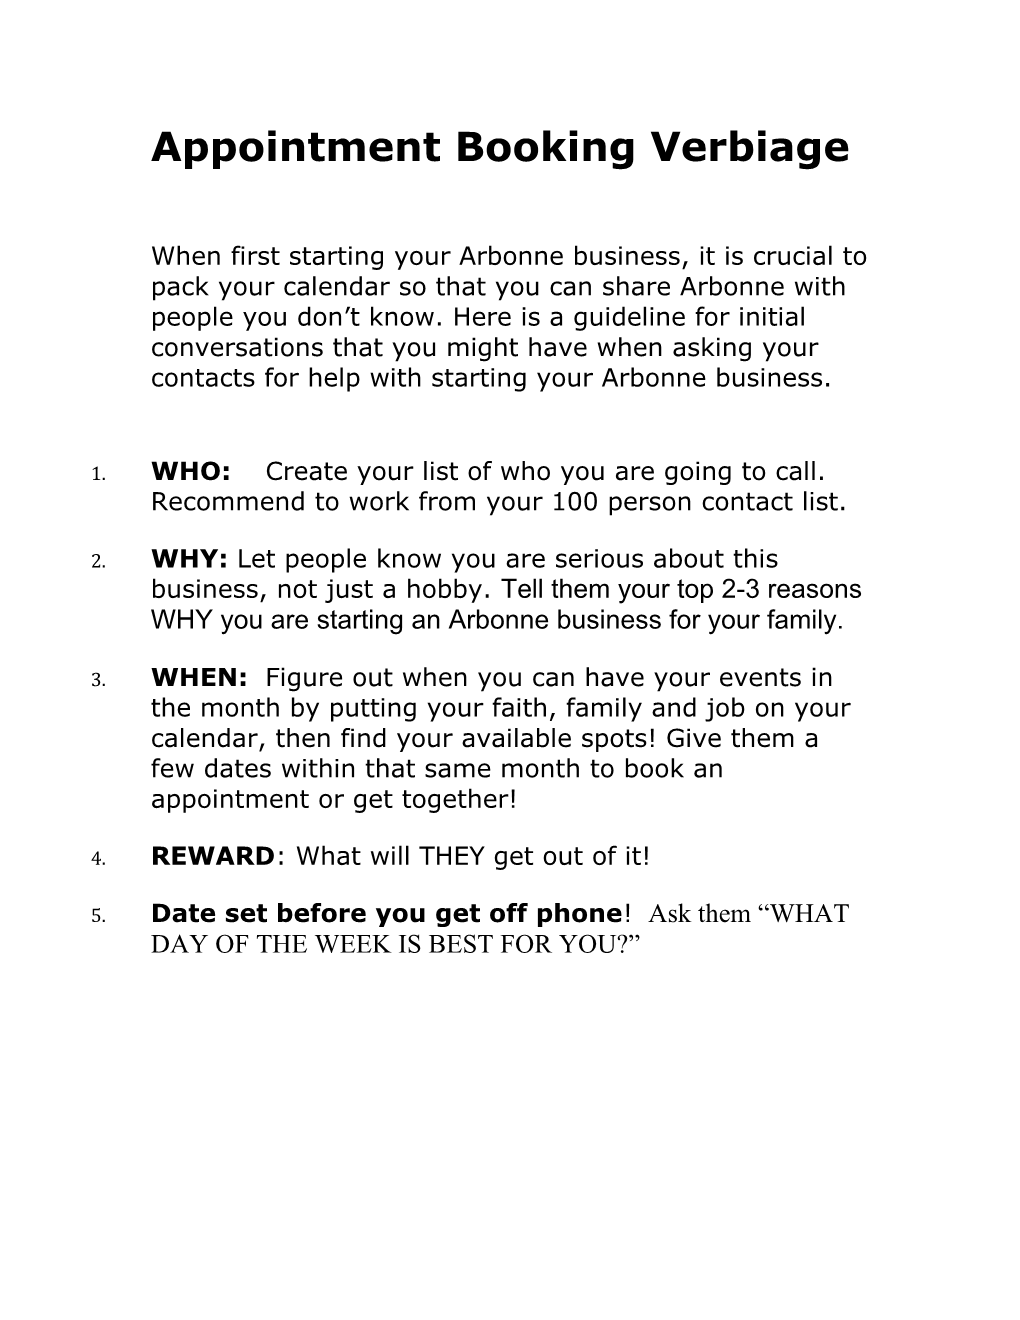 Appointment Booking Verbiage